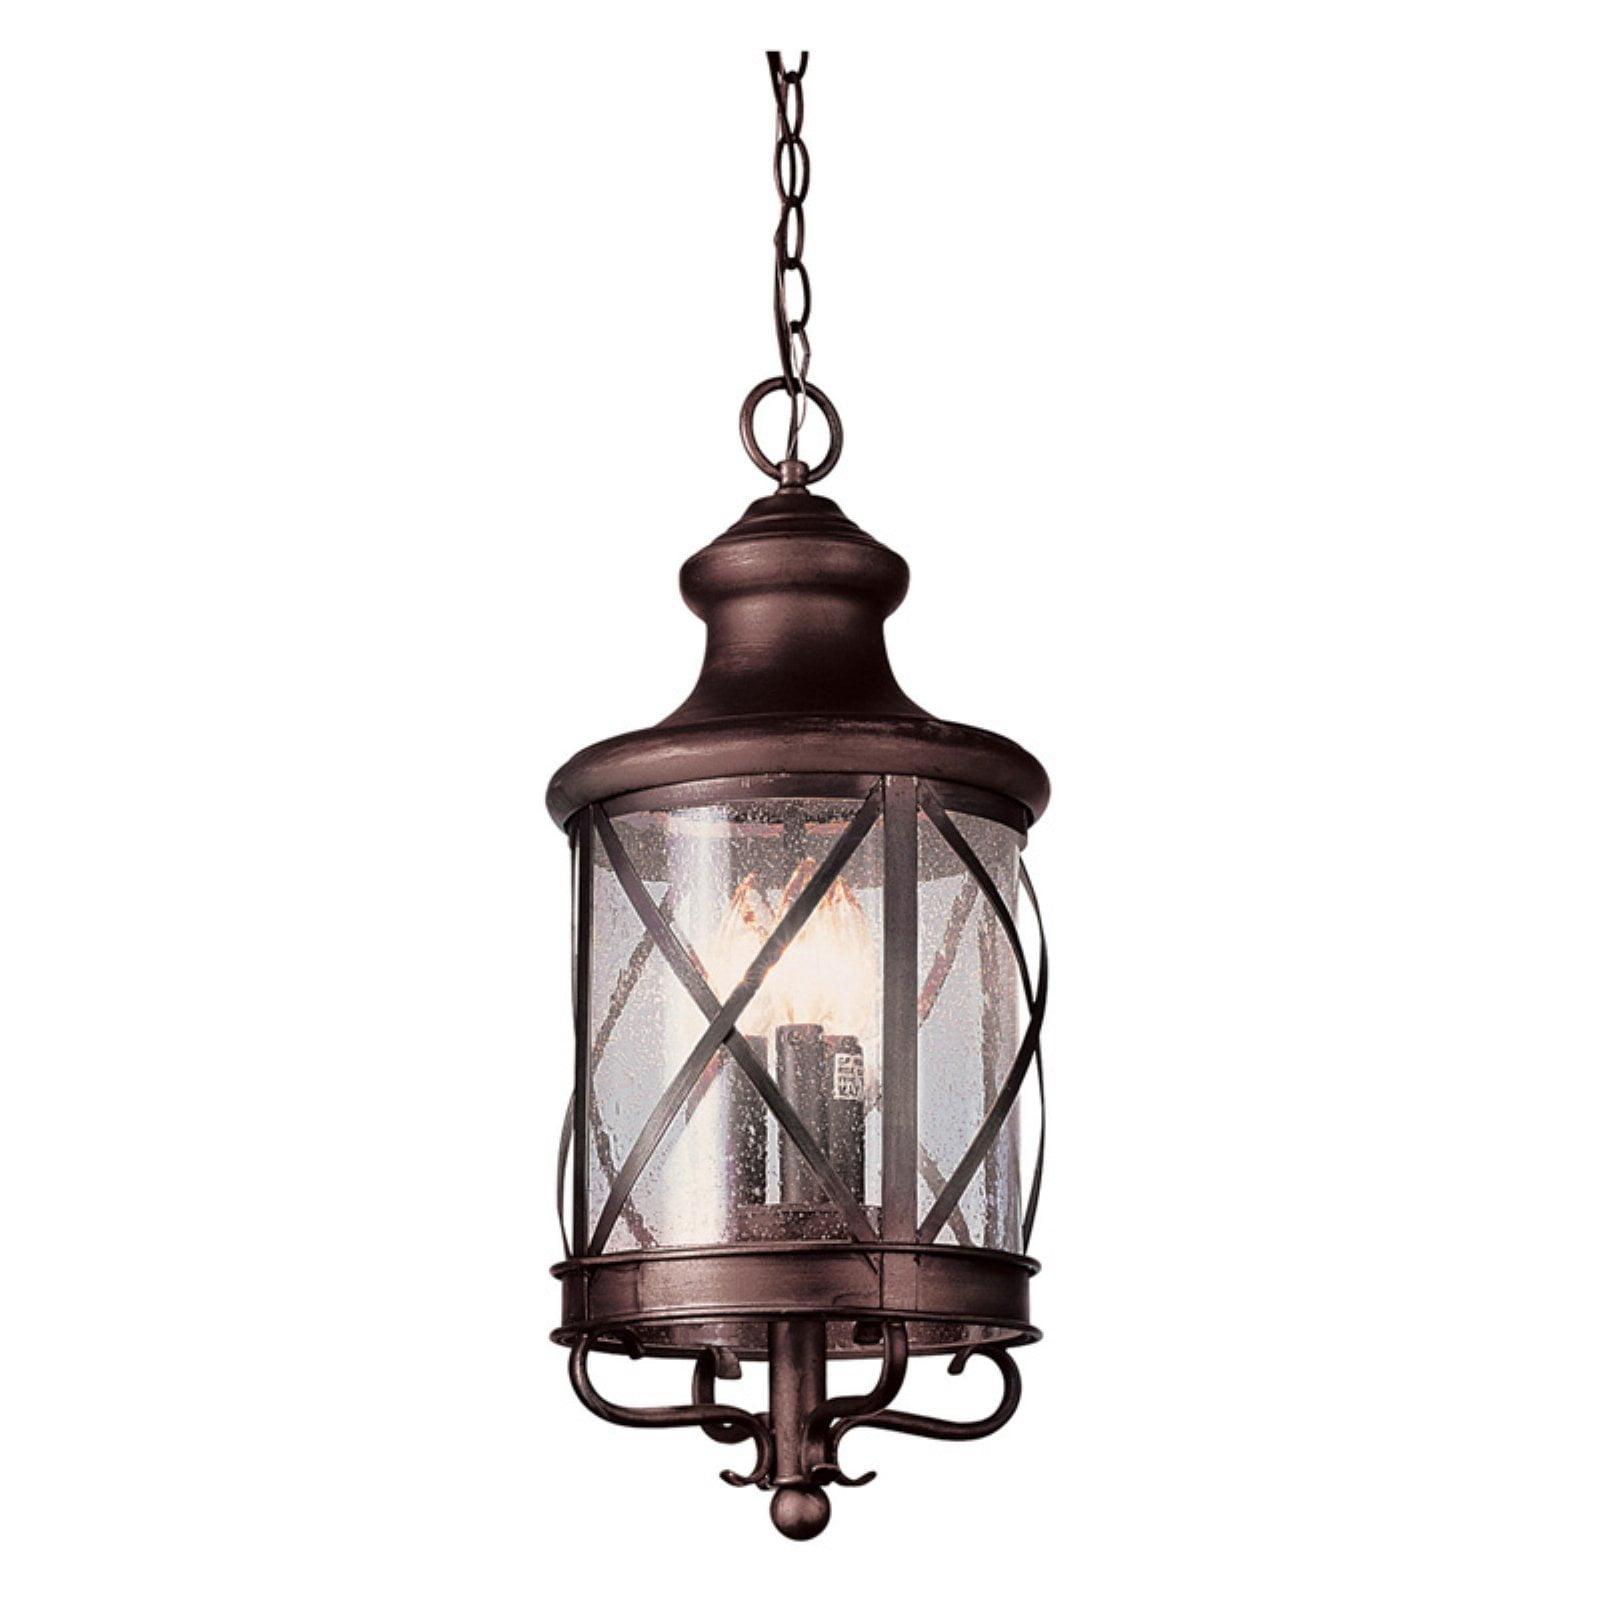 Rustic Seeded Glass 22" Bronze Outdoor Pendant Light with Cross-Bar Detail